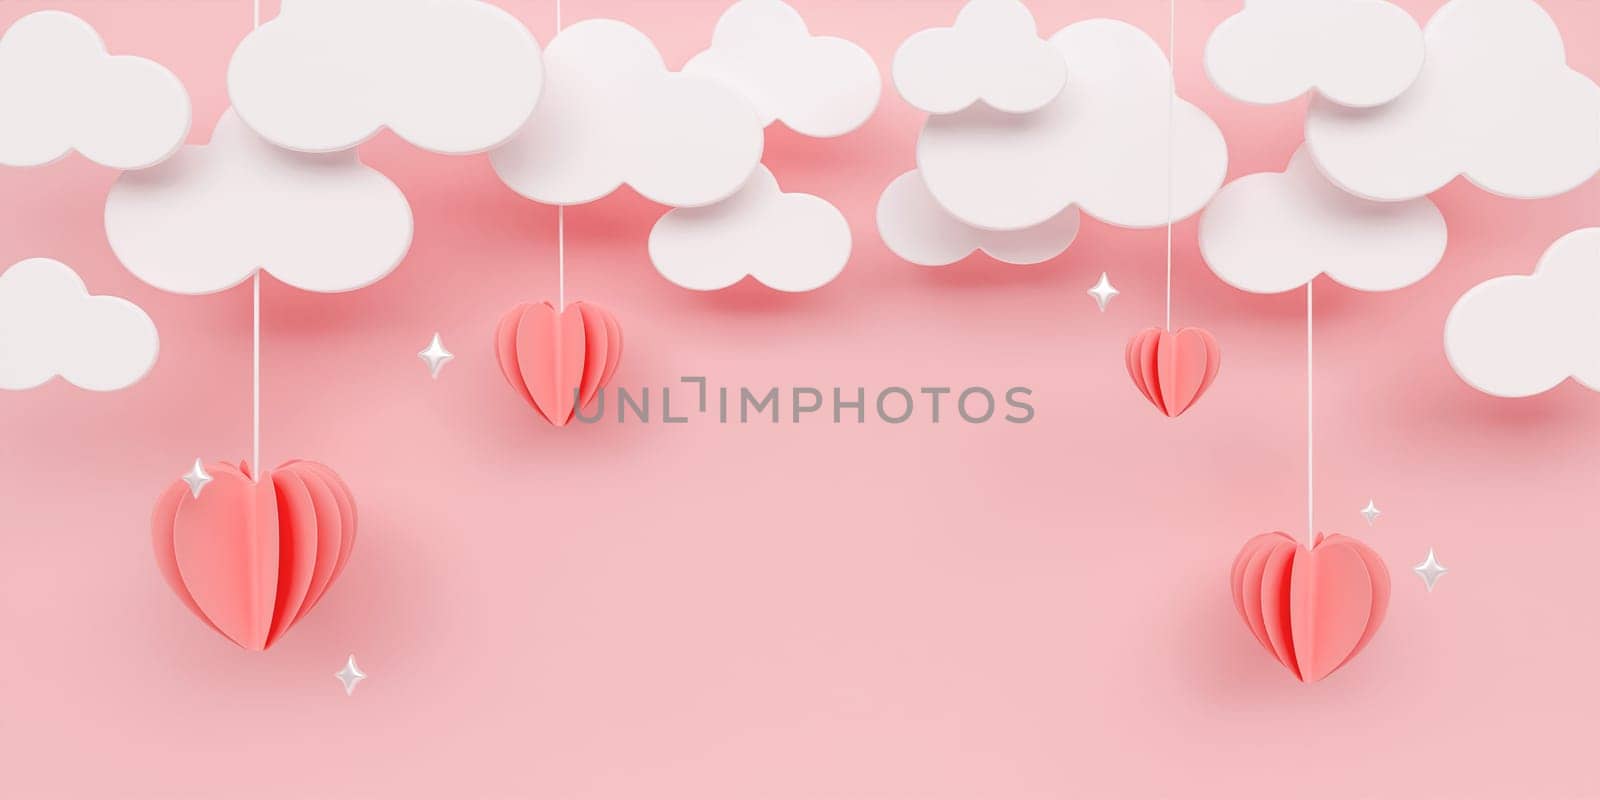 Poster or banner with pink pastel sky and paper cut clouds. Copy space for text. Happy Valentine's day sale header or voucher template with hanging hearts. 3D render illustration.